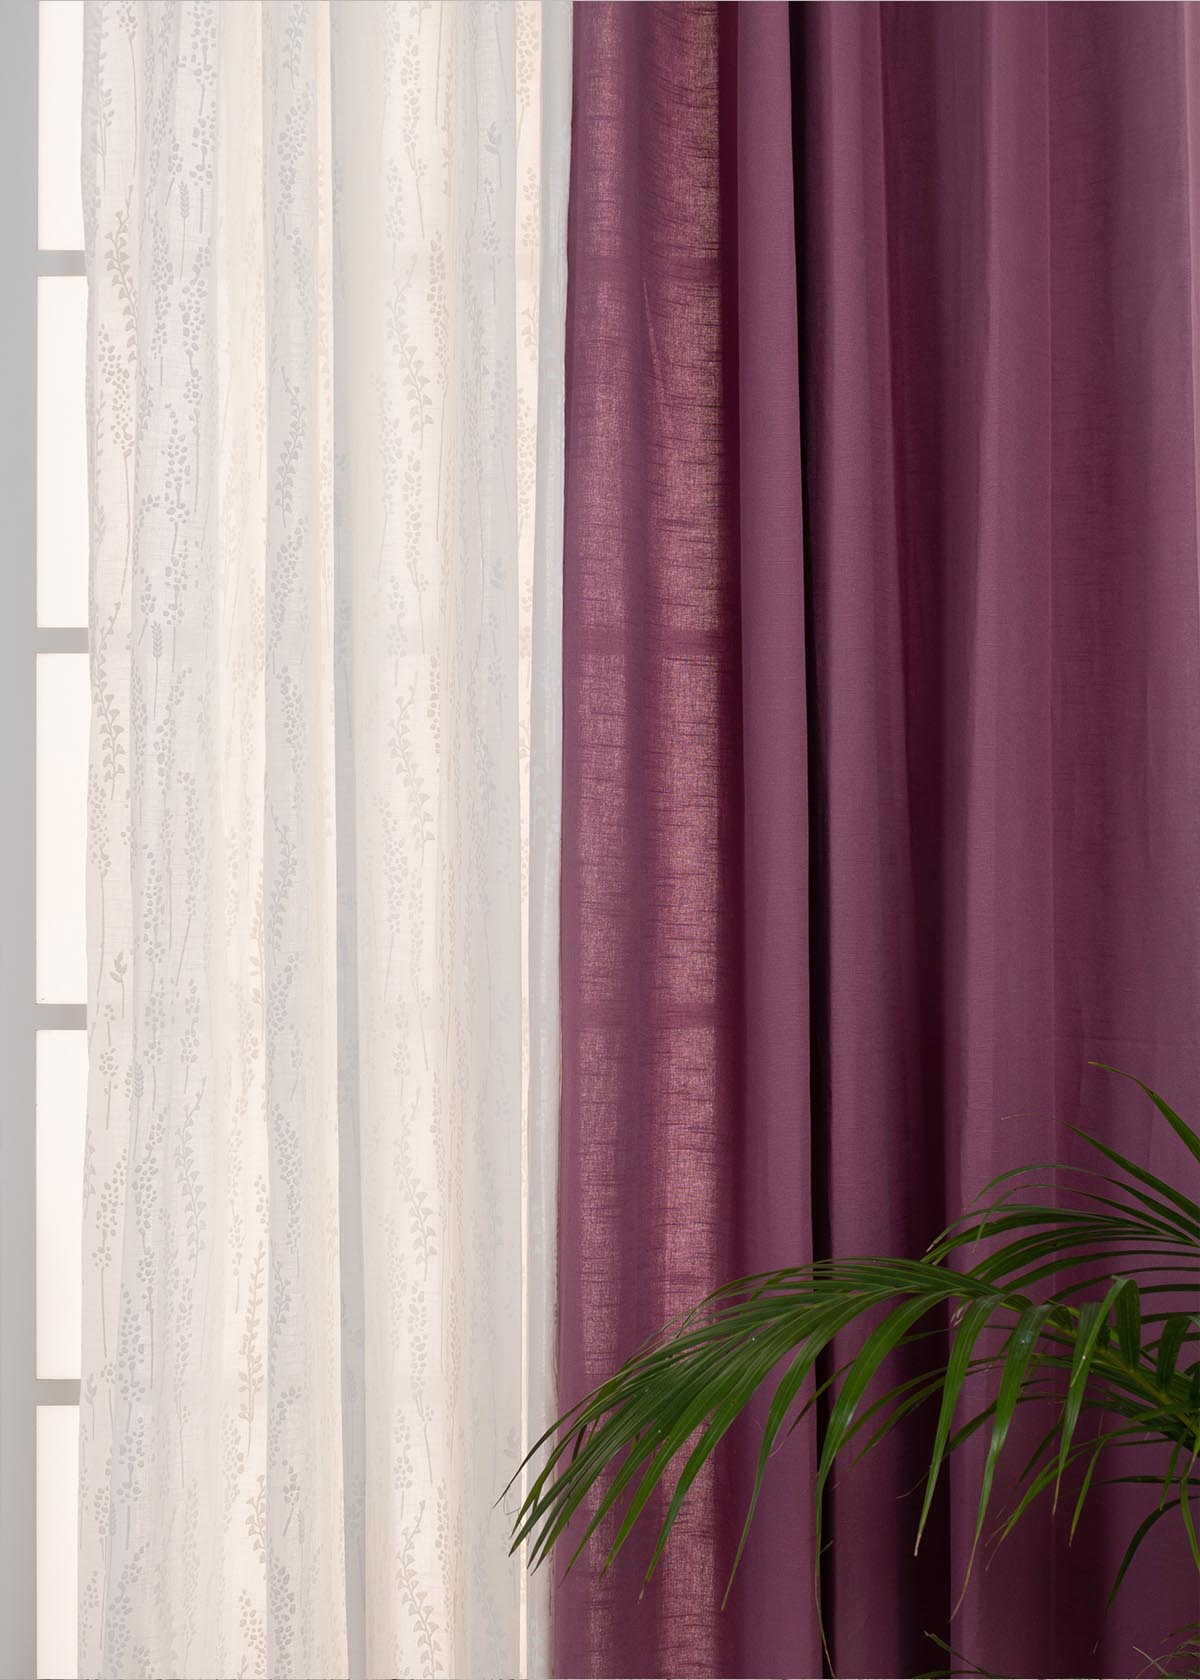 Grape Solid, Grass Fields In White Sheer Set Of 2 Combo Cotton Curtain - Grape White